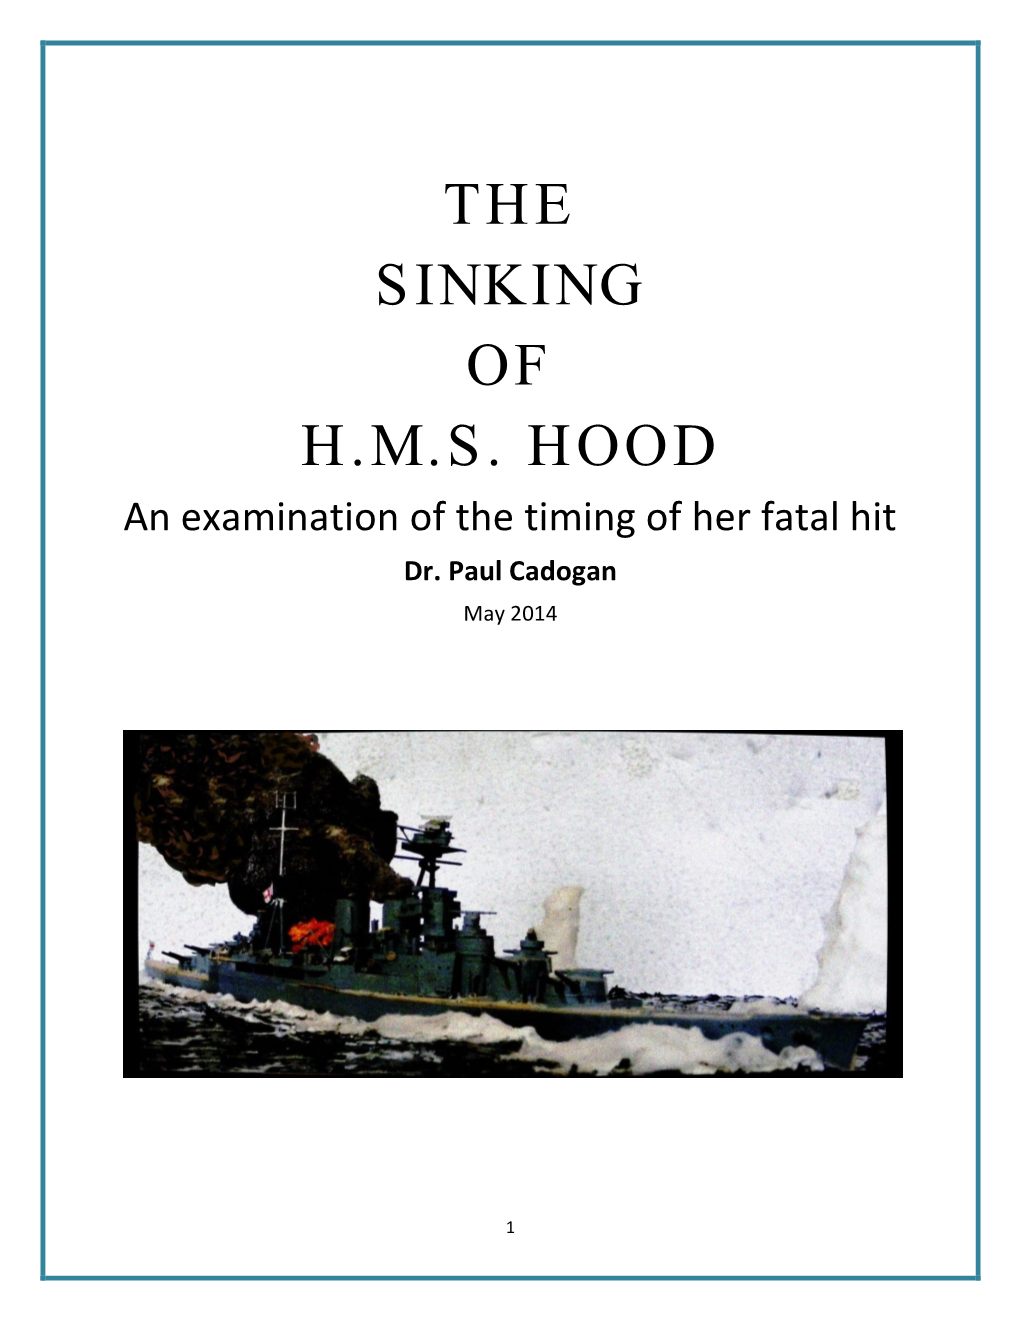 THE SINKING of H.M.S. HOOD an Examination of the Timing of Her Fatal Hit Dr